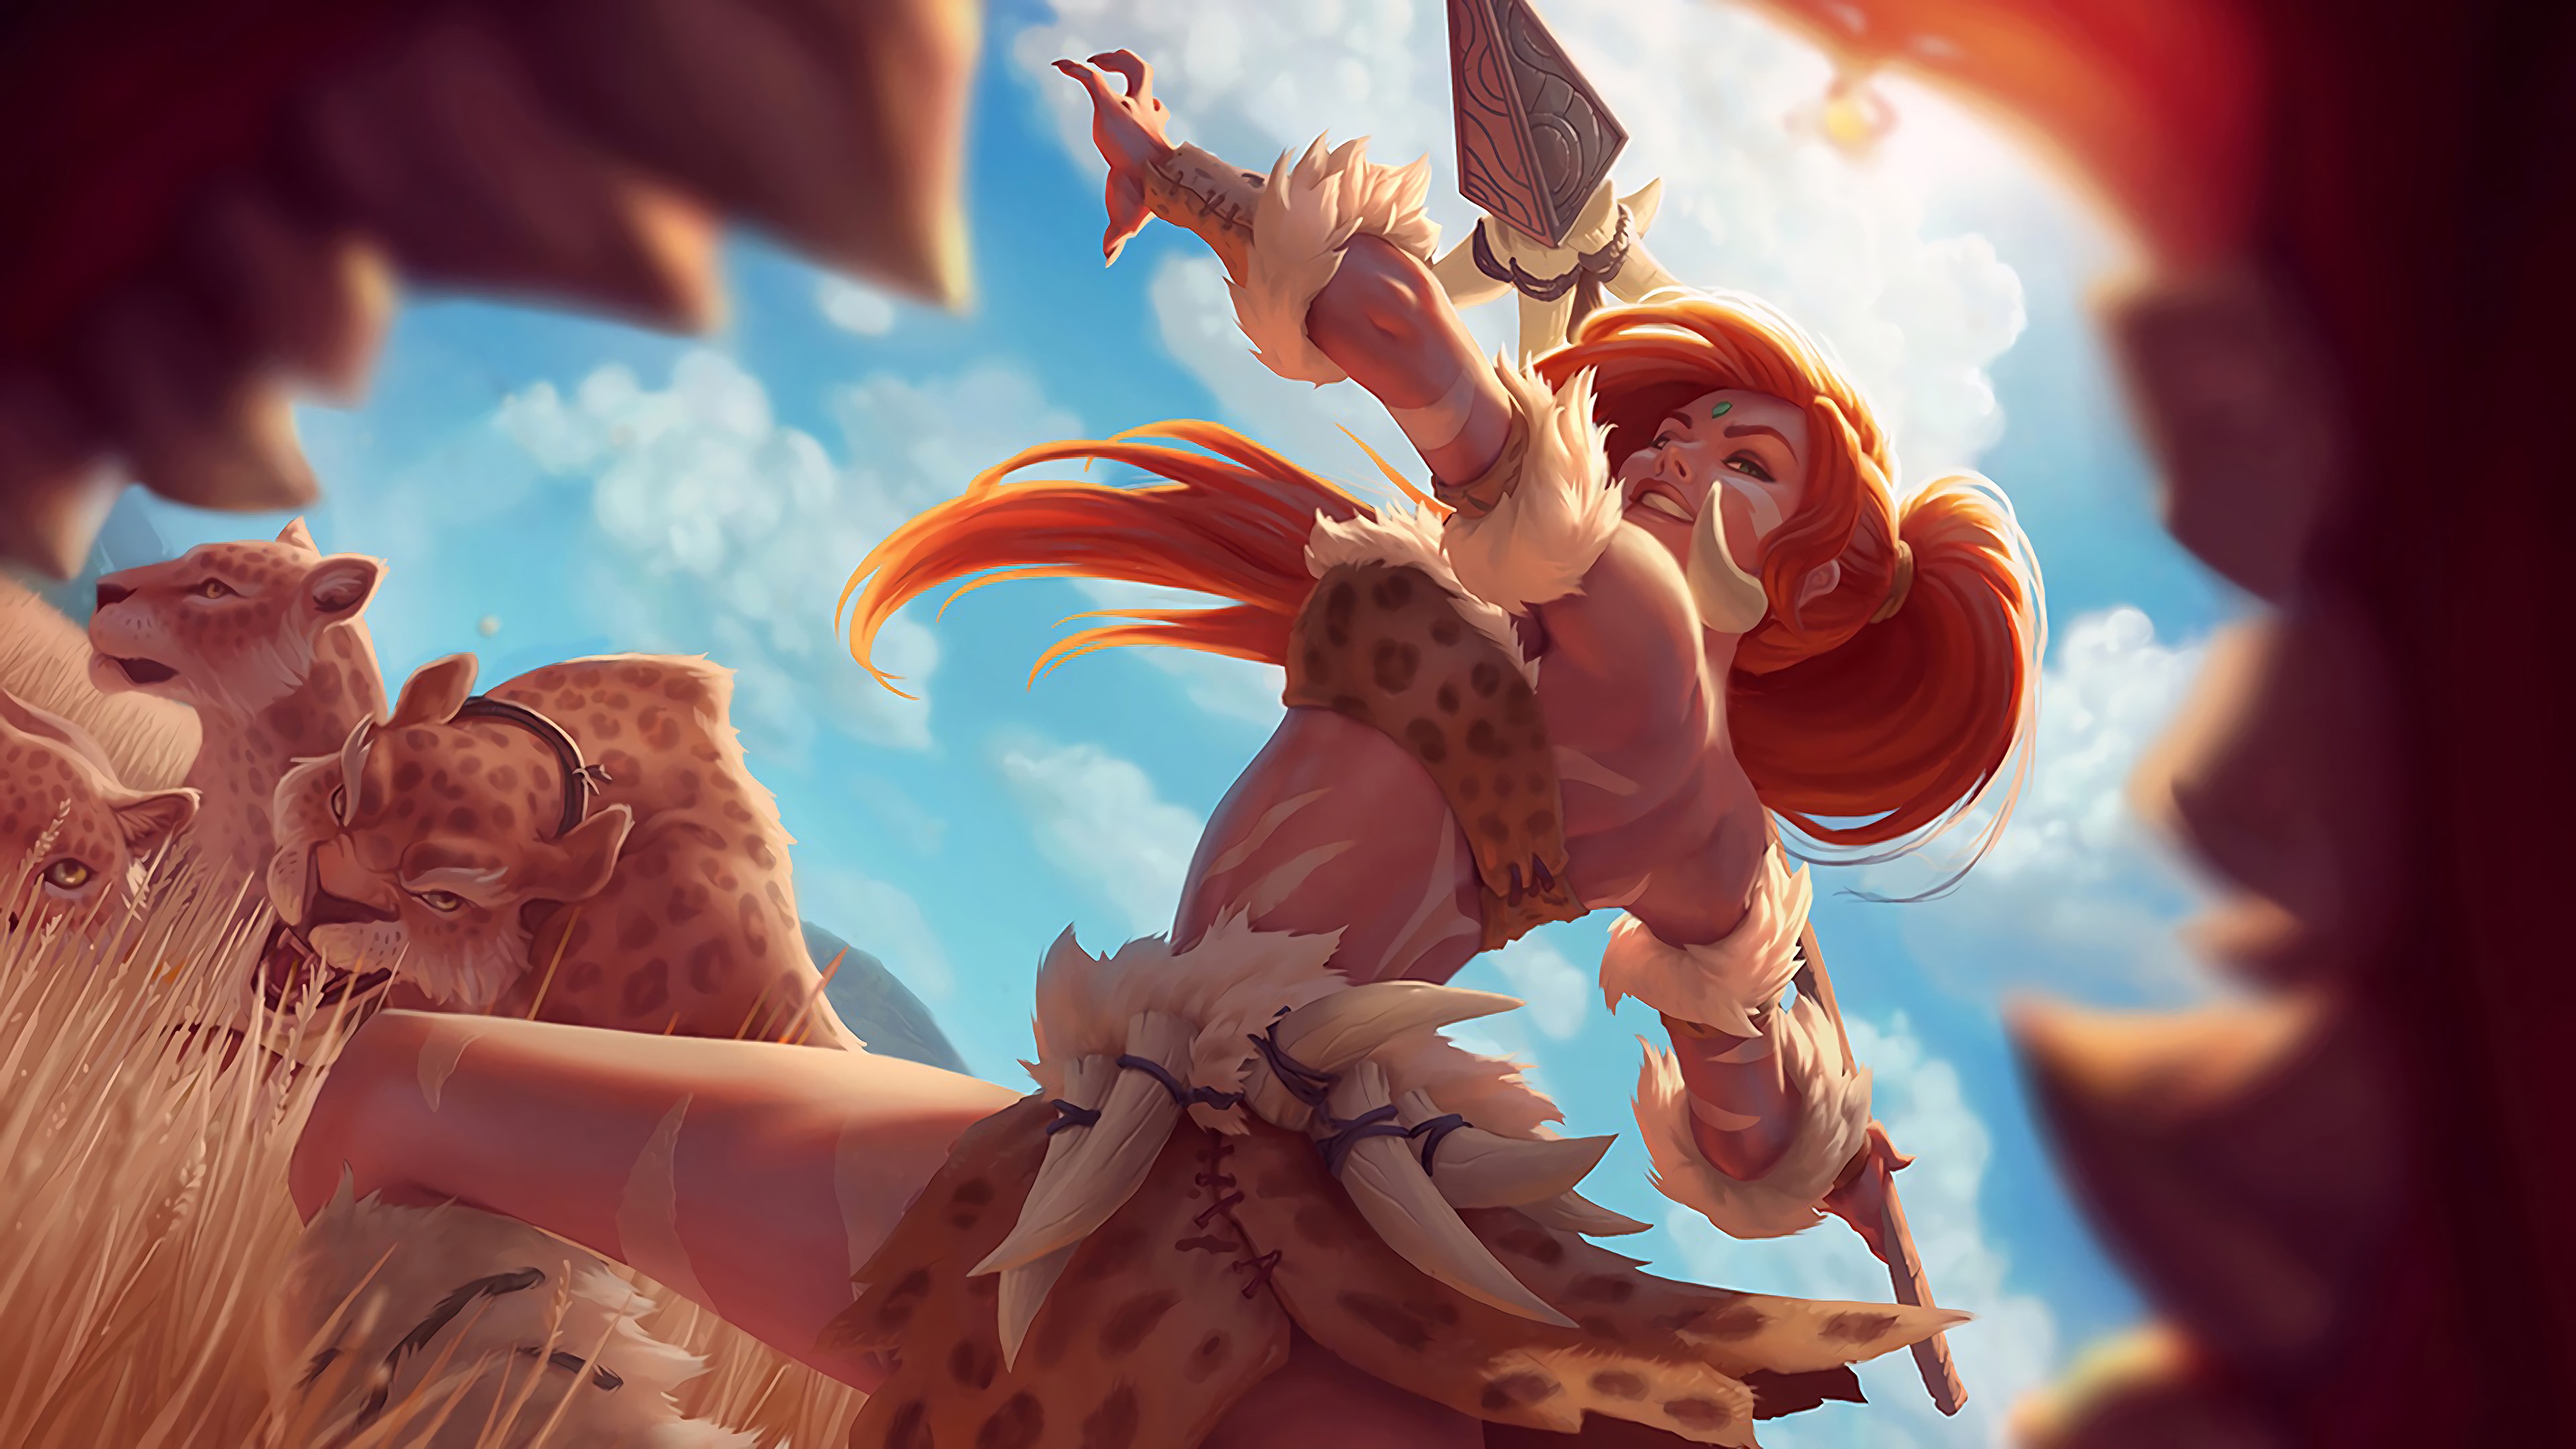 General 3840x2160 women artwork hunter Nidalee (League of Legends) League of Legends video game girls video game characters PC gaming redhead spear girls with guns fantasy art fantasy girl